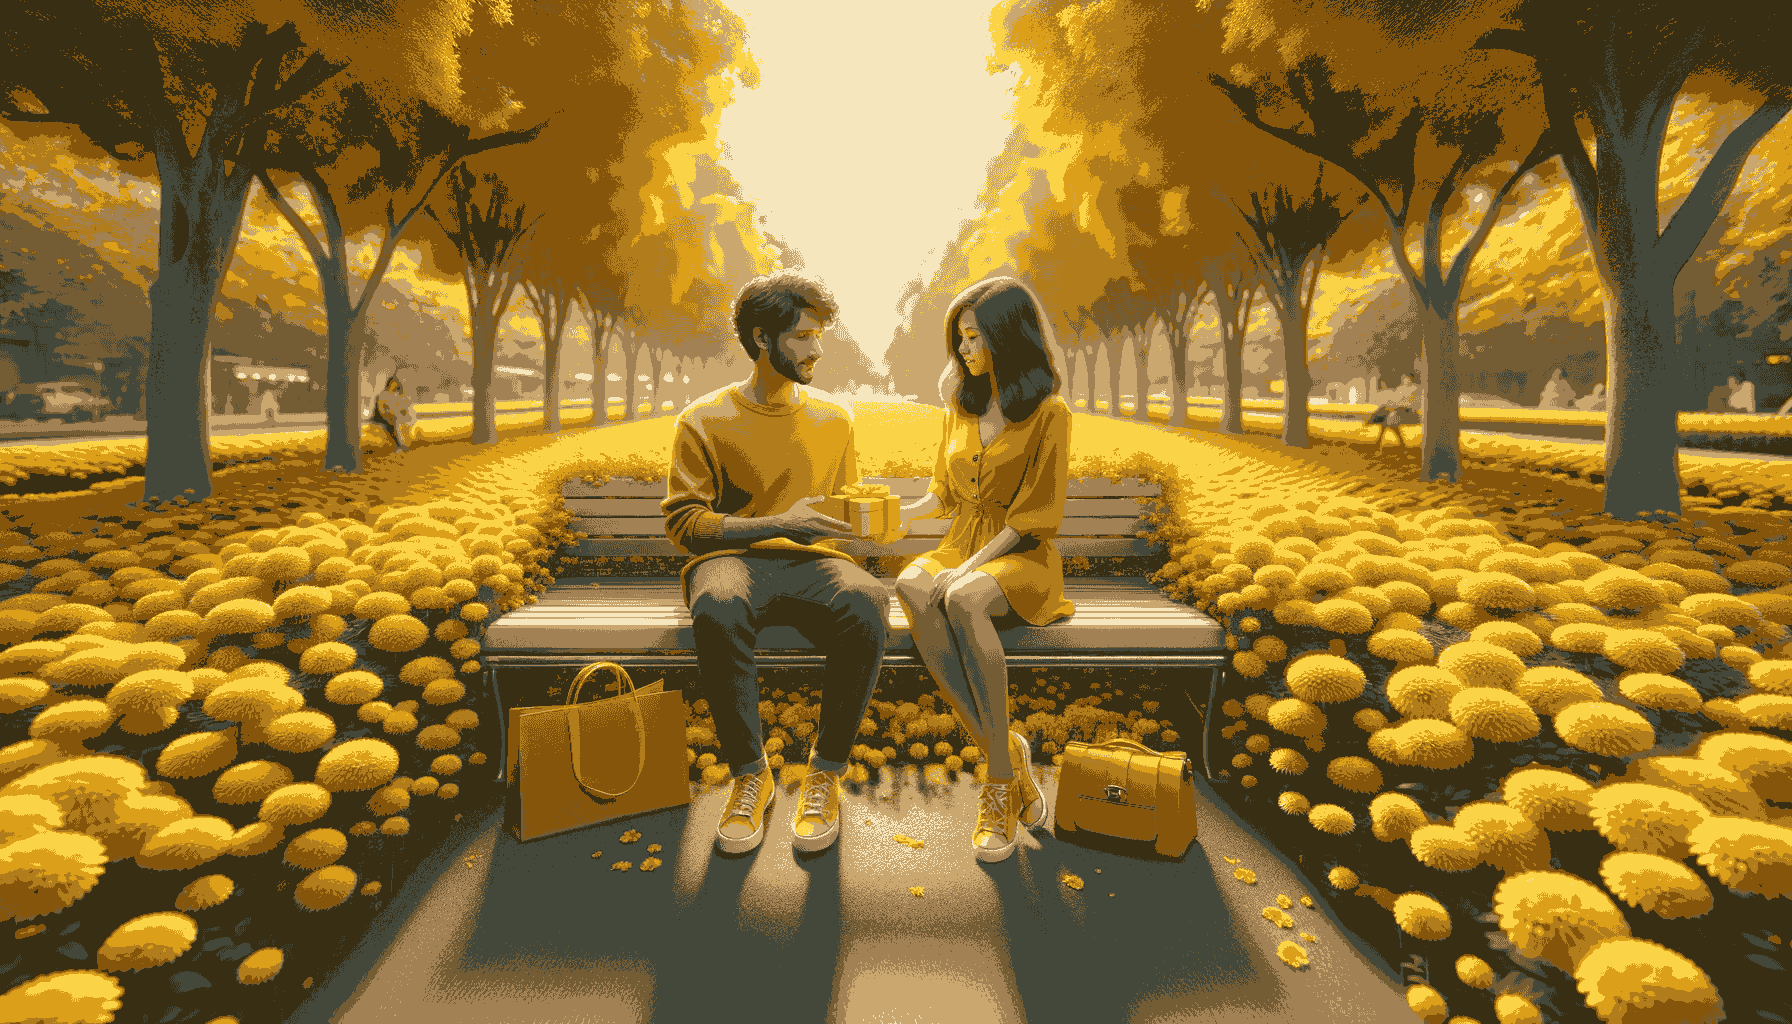 image of a couple sitting on a bench in a park filled with yellow flowers and trees. They are dressed in casual clothes